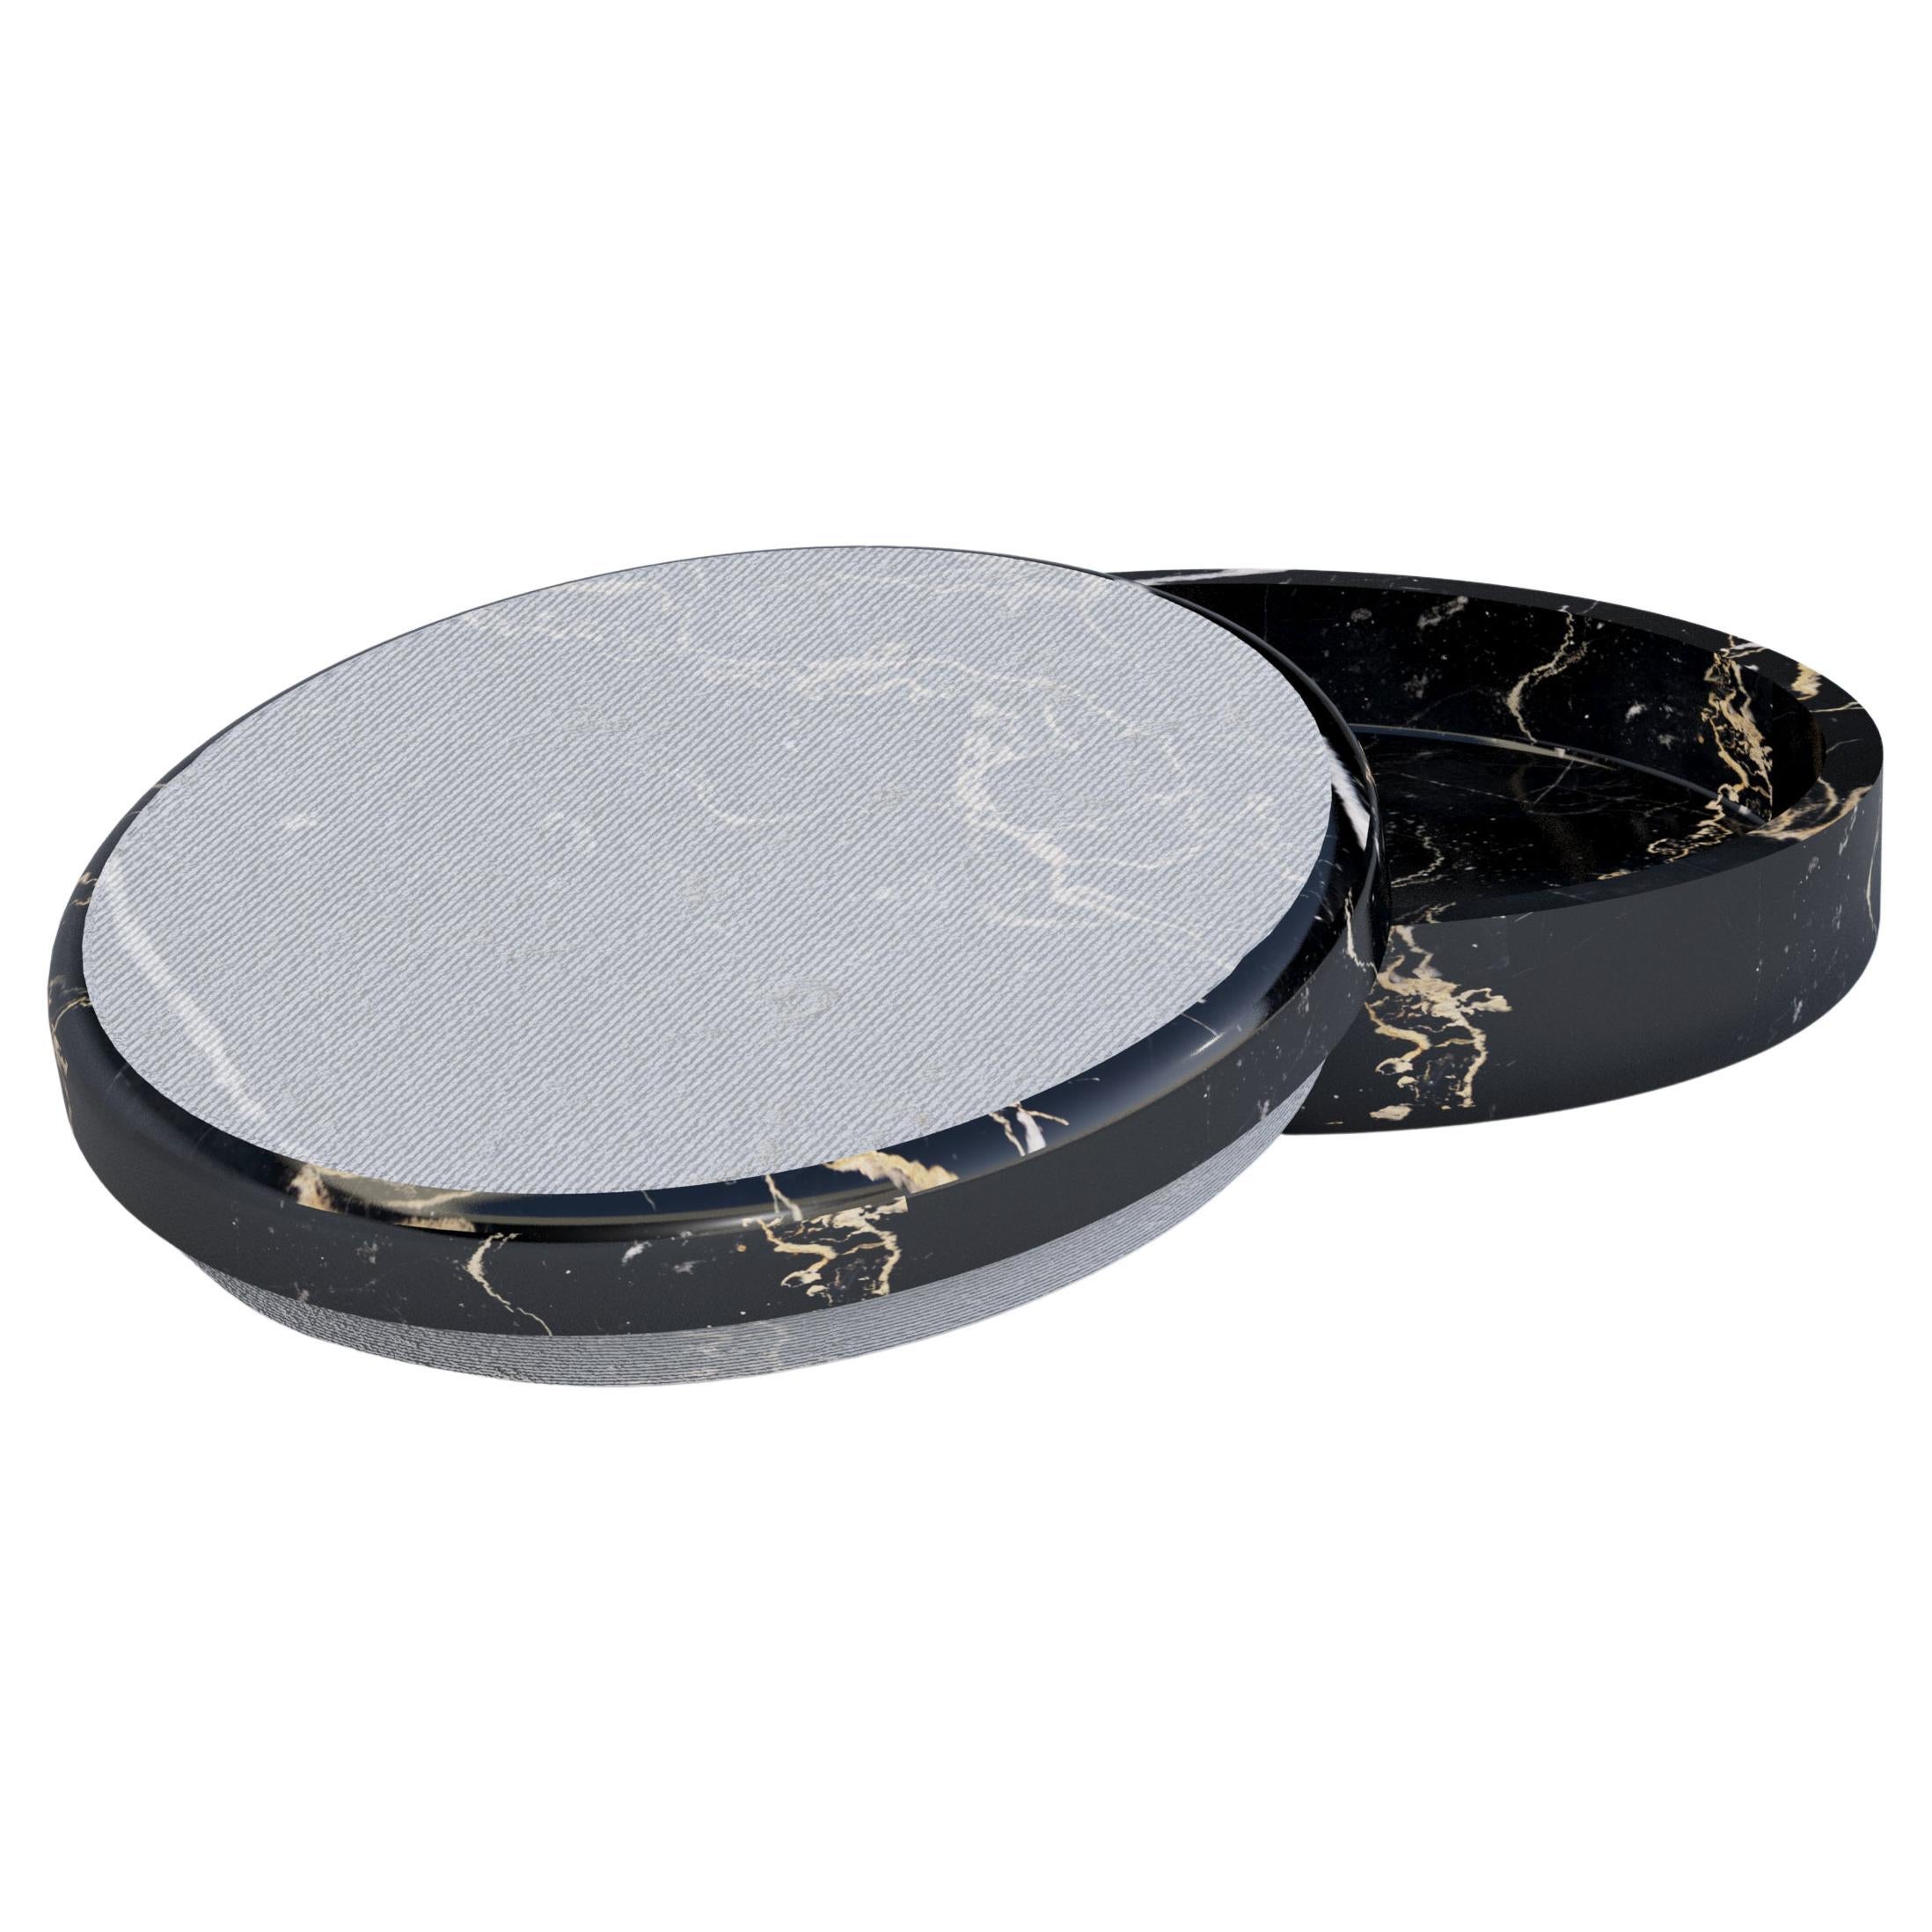 21st Century by Marco Marino "Scatole" Marble Boxes Jewel Case in Black Portoro For Sale